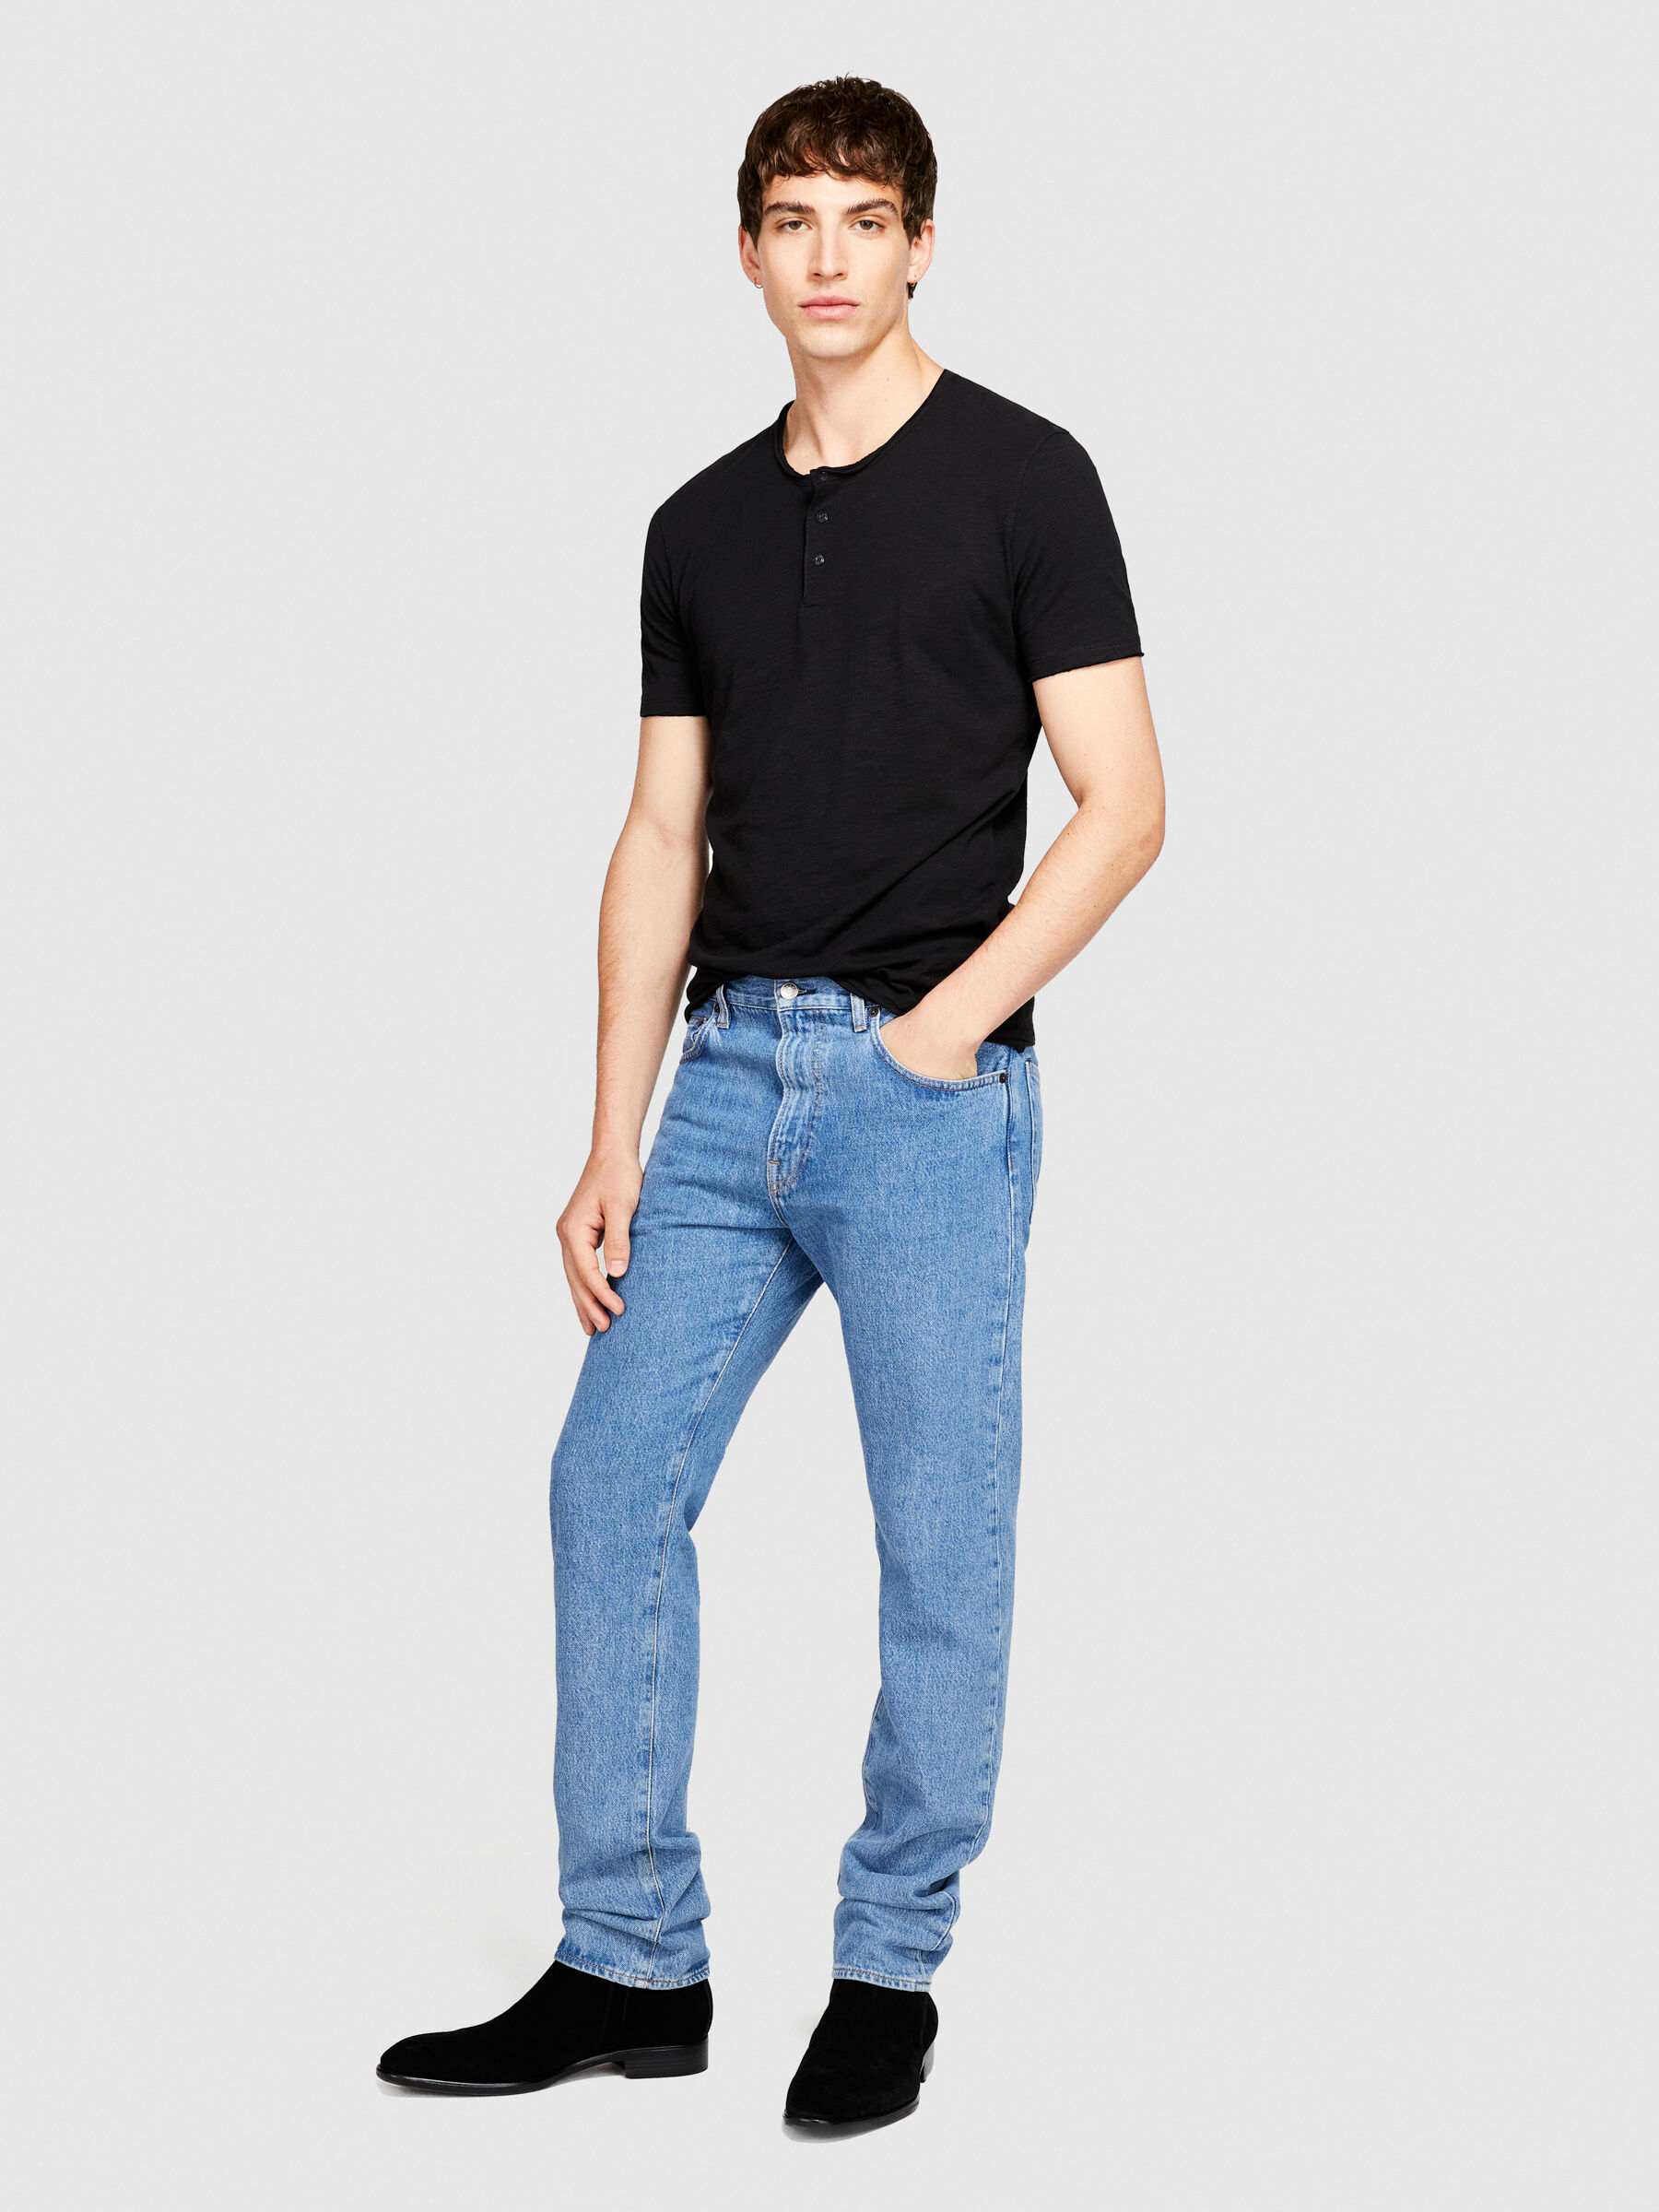 42 Best Blue Jeans With White Shirt Outfits For Men